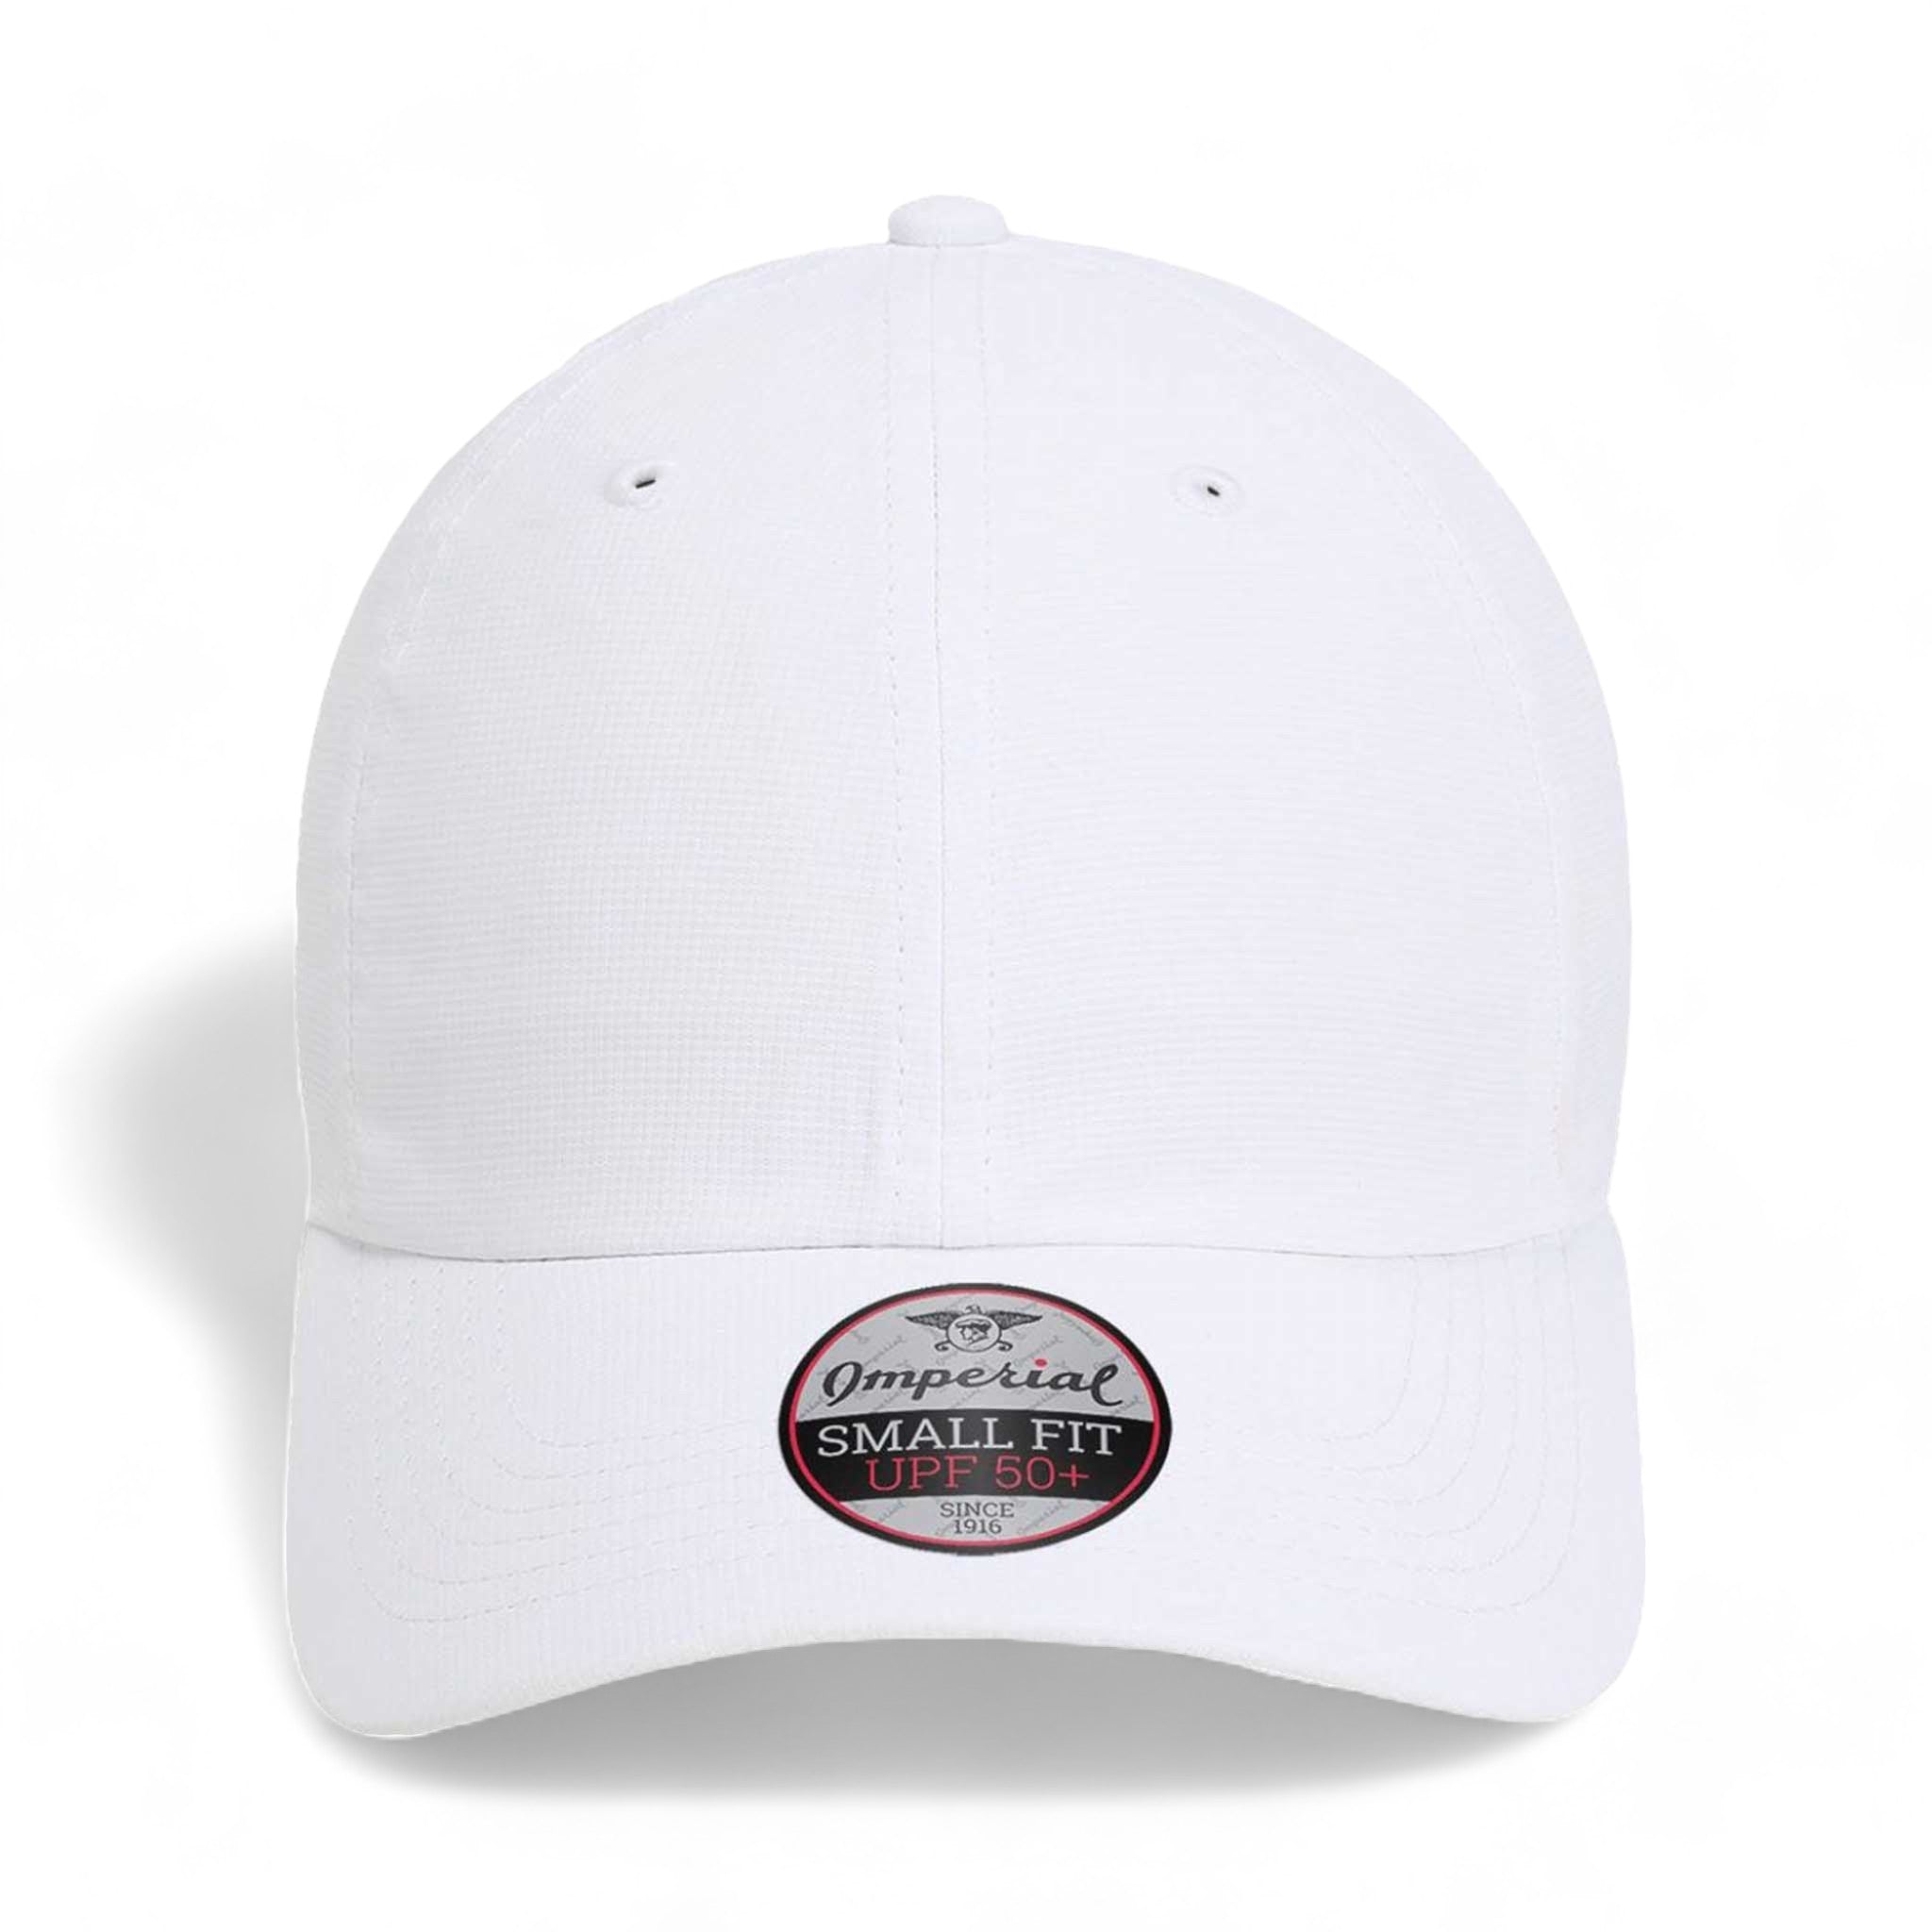 Front view of Imperial L338 custom hat in white